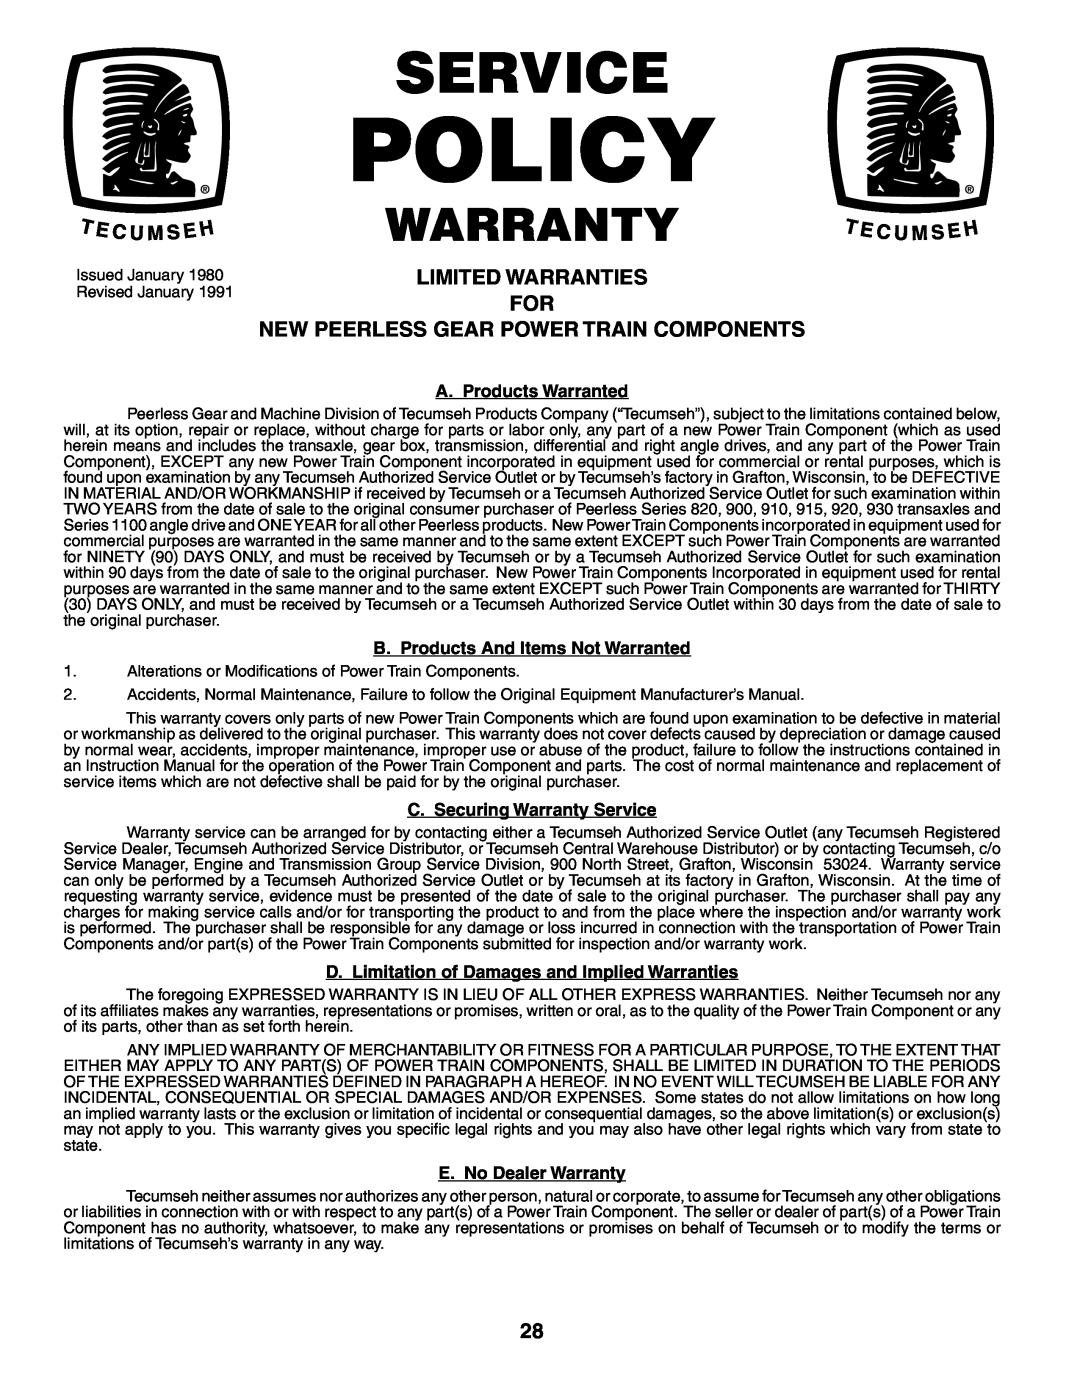 Poulan 96012004400, 401152 manual Limited Warranties For New Peerless Gear Power Train Components, Policy, Service, Warranty 